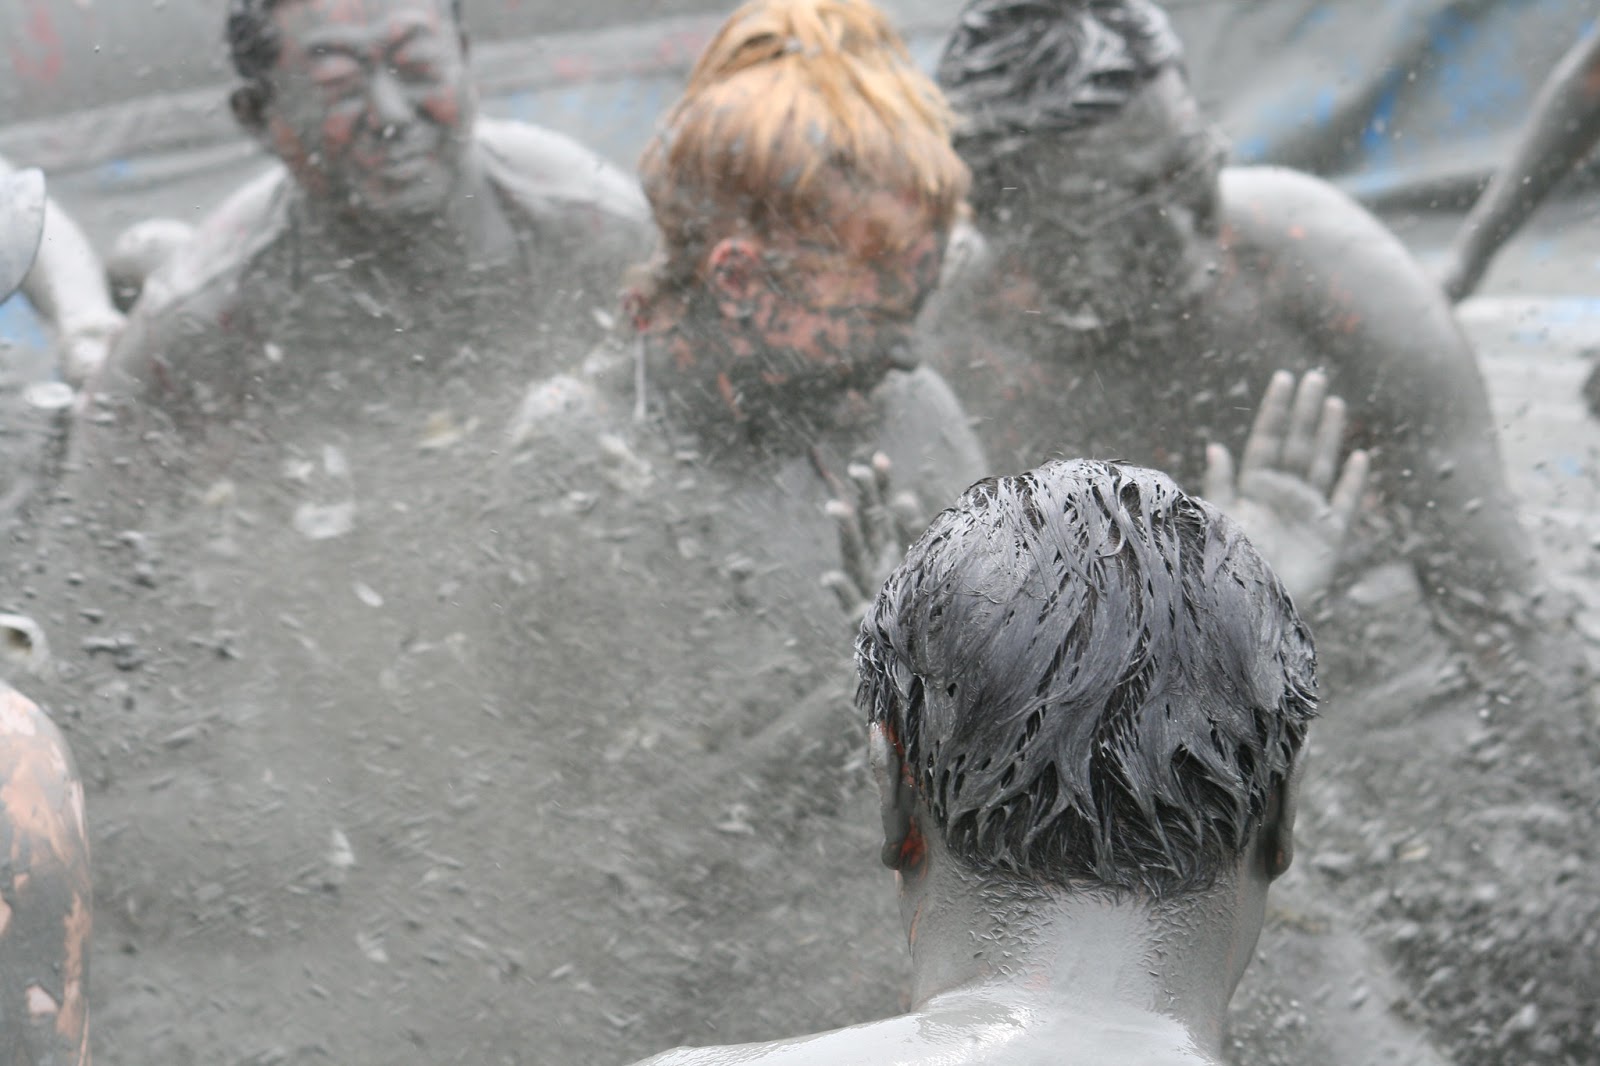 Get doused in mud in Boryeong. Photo on Flickr Hypnotica Studios Infinite (CC BY 2.0)